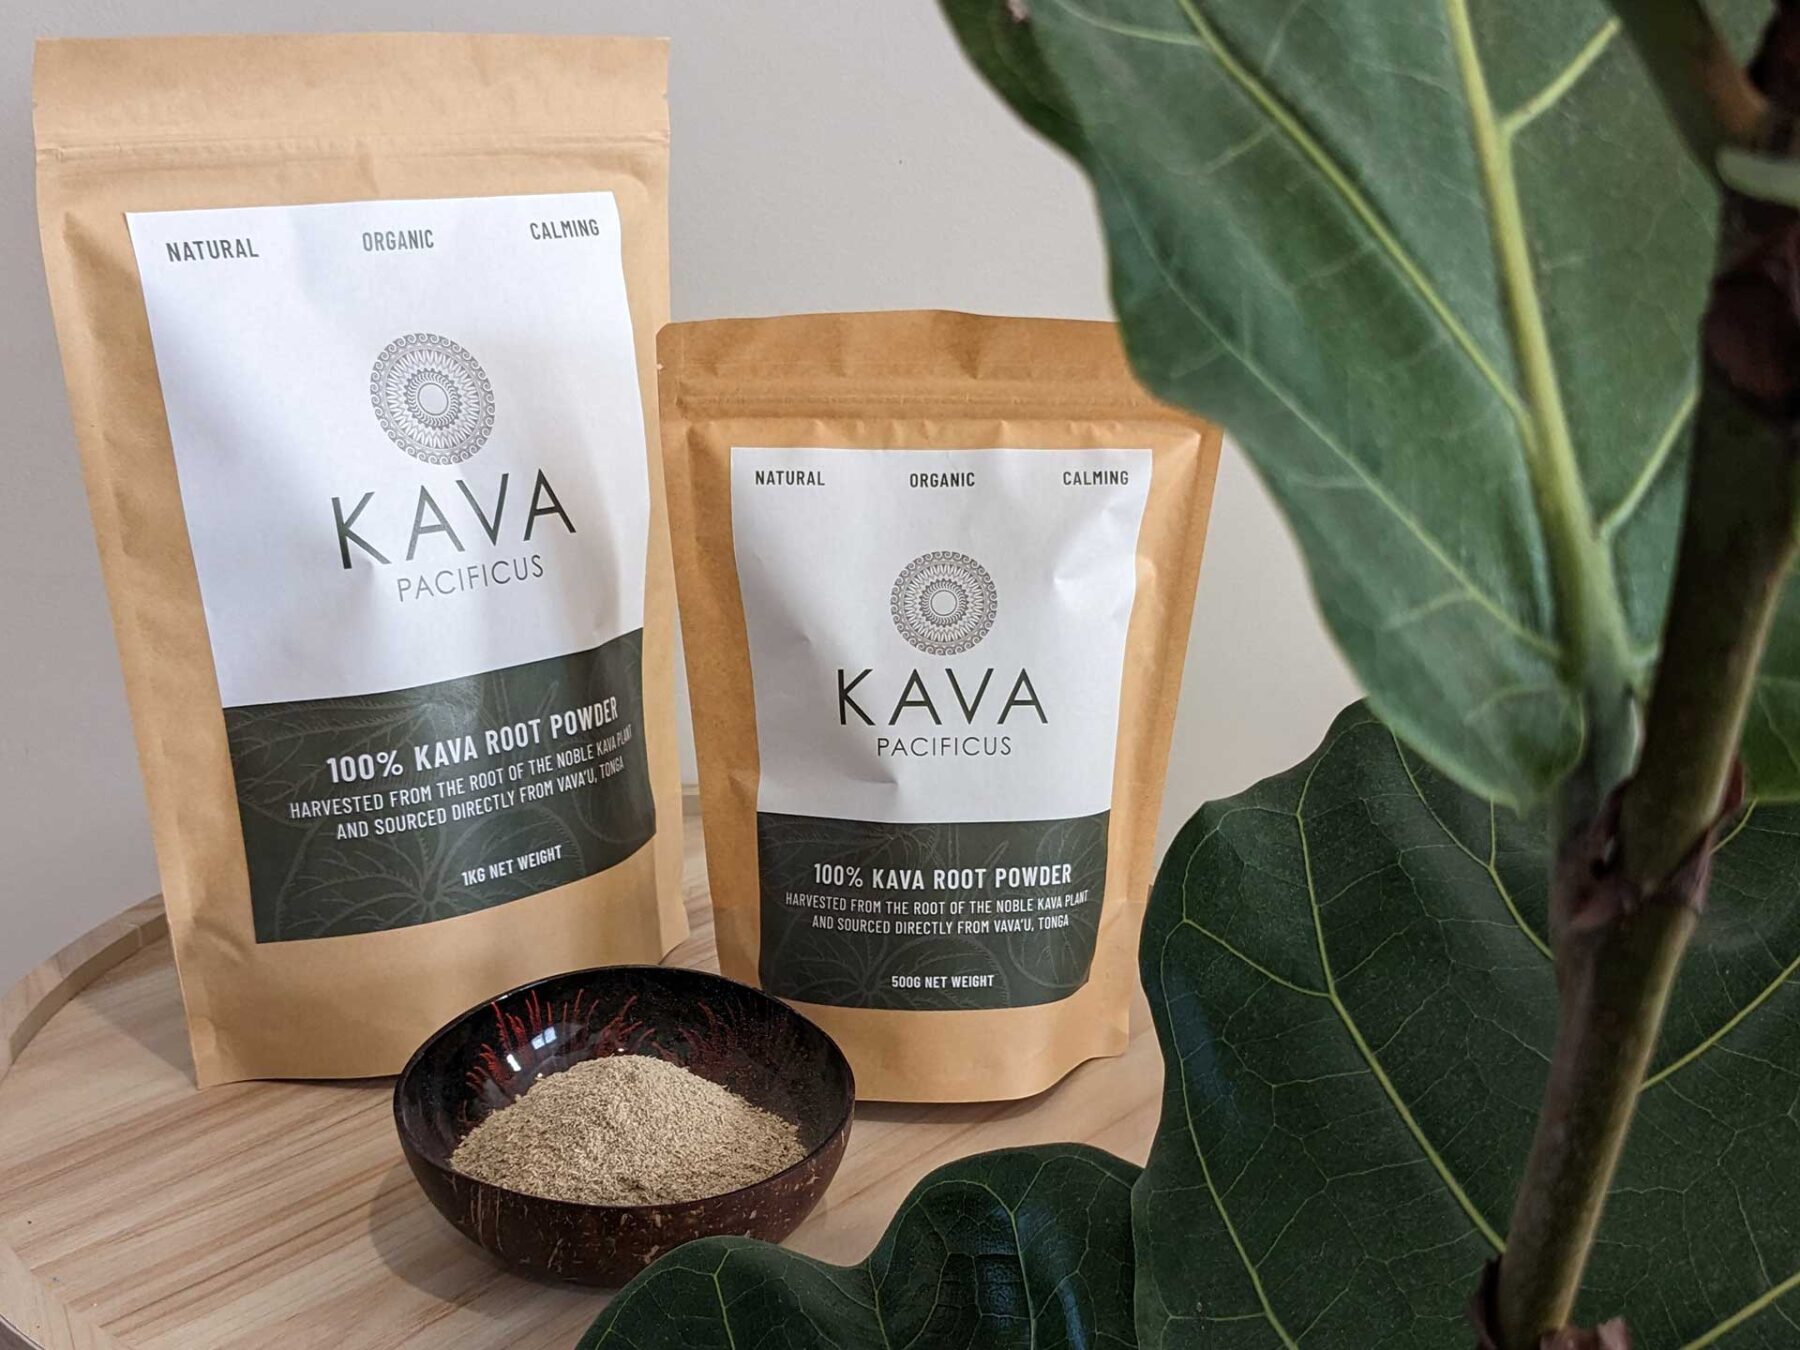 Kava Pacificus 100% Kava Root Powder Bags with Kava Bowl